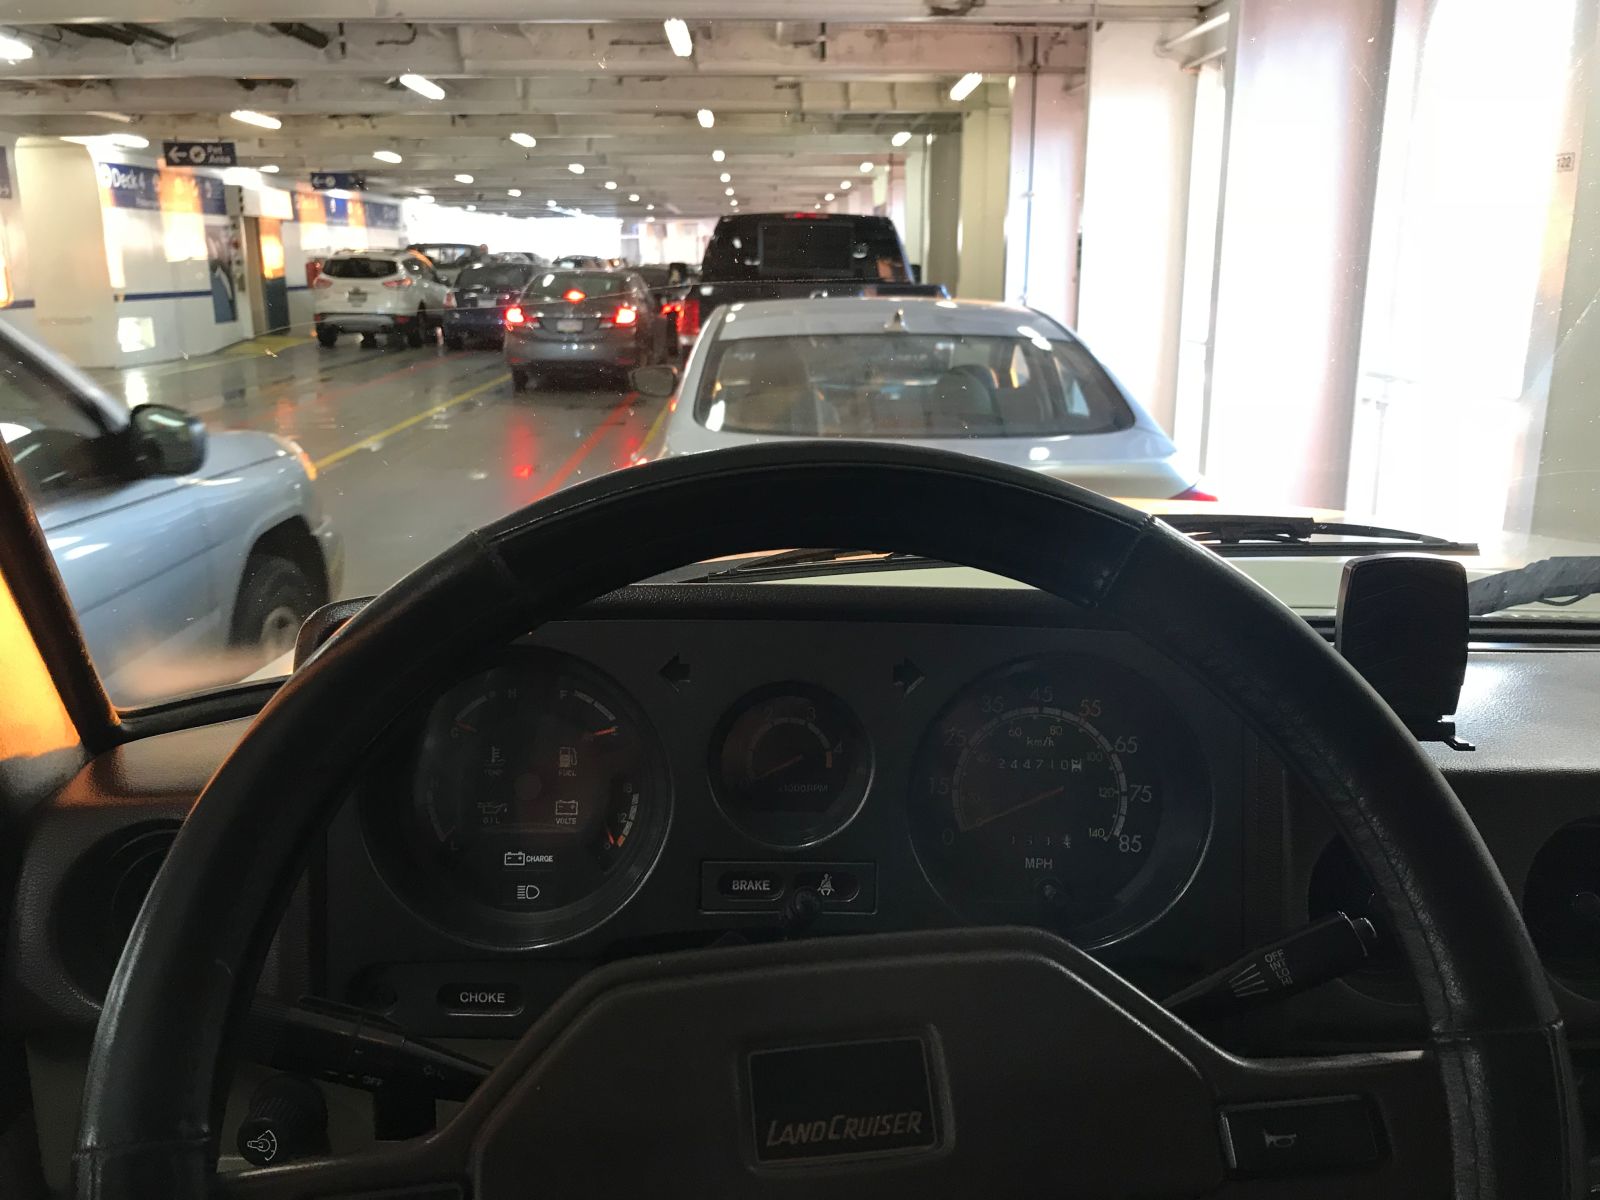 Made it onto the ferry. Can’t wait to ditch that steering wheel cover, despite it being comfy.